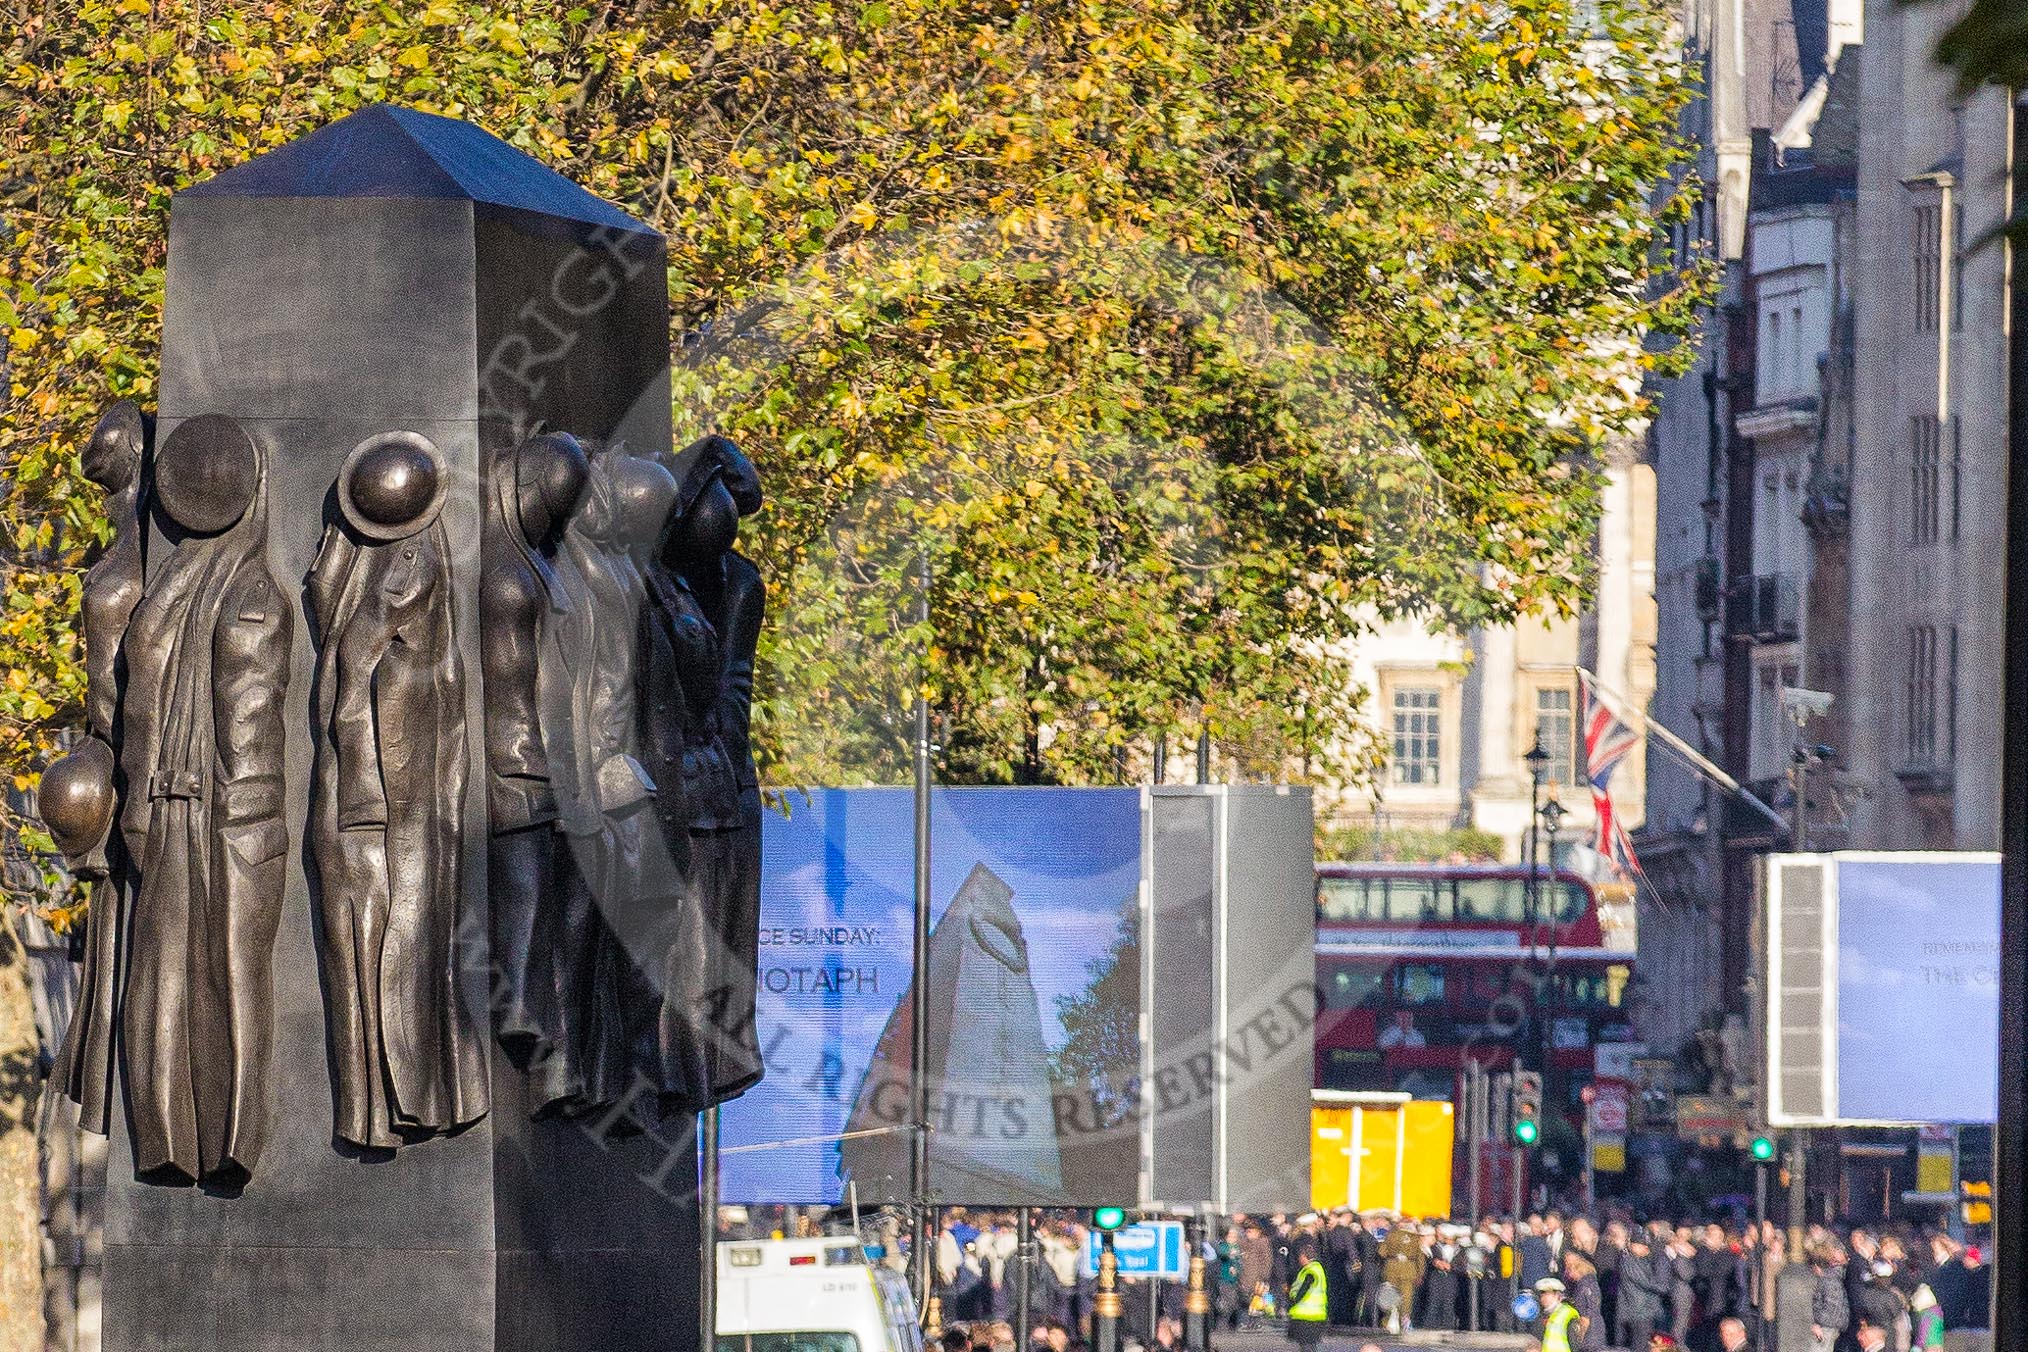 The Monument to the Women of World War II in Whitehall, unveiled at the 60th anniversary of the end of the Second World War by Queen Elizabeth II. Behind two big screens for the BBC live broadcast of tge Cenotaph Ceremony.